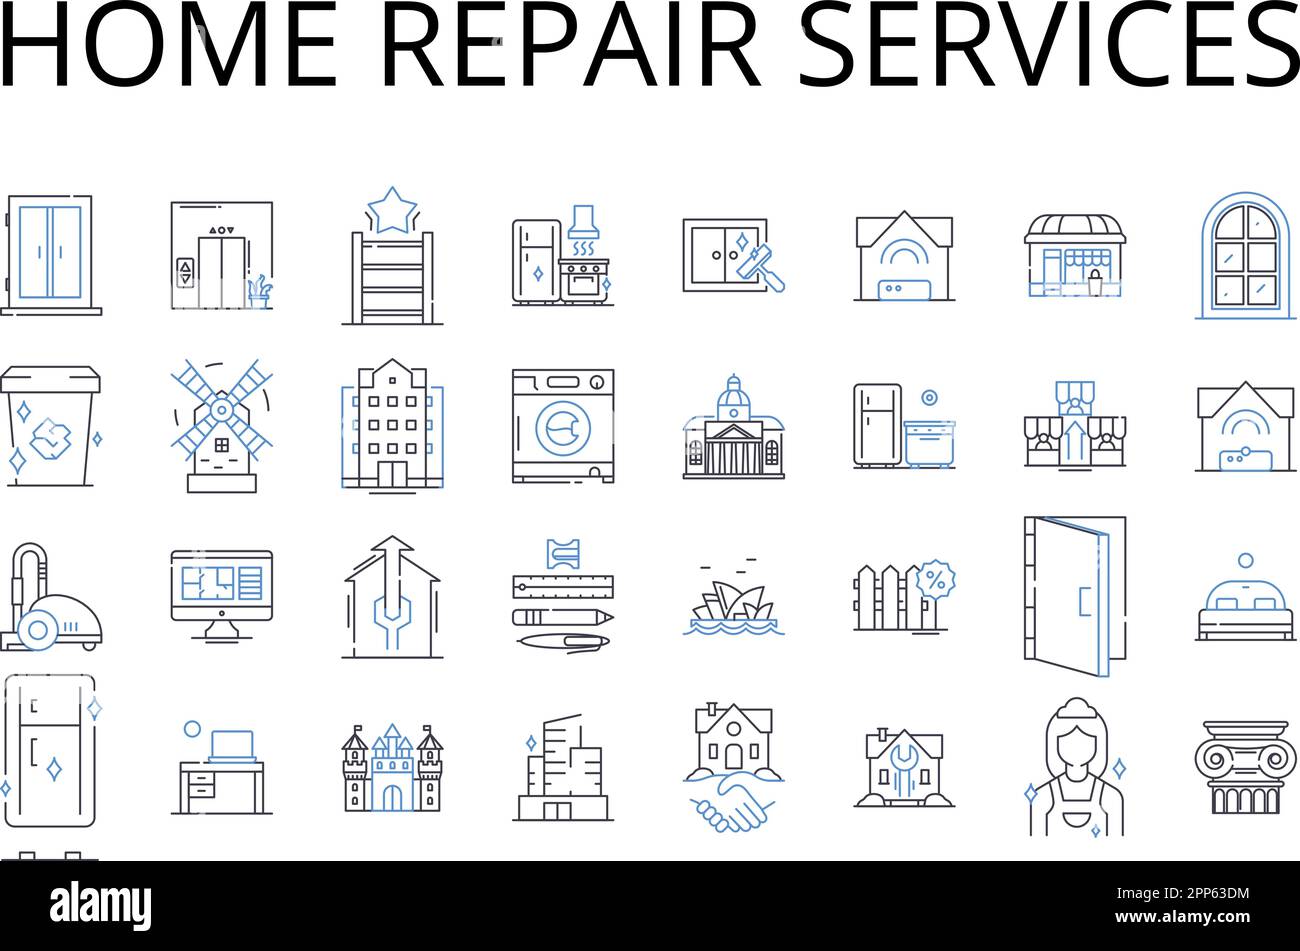 Home repair services line icons collection. Handyman services, Household maintenance, Property repair, Fixing up, Property restoration, Renovation Stock Vector